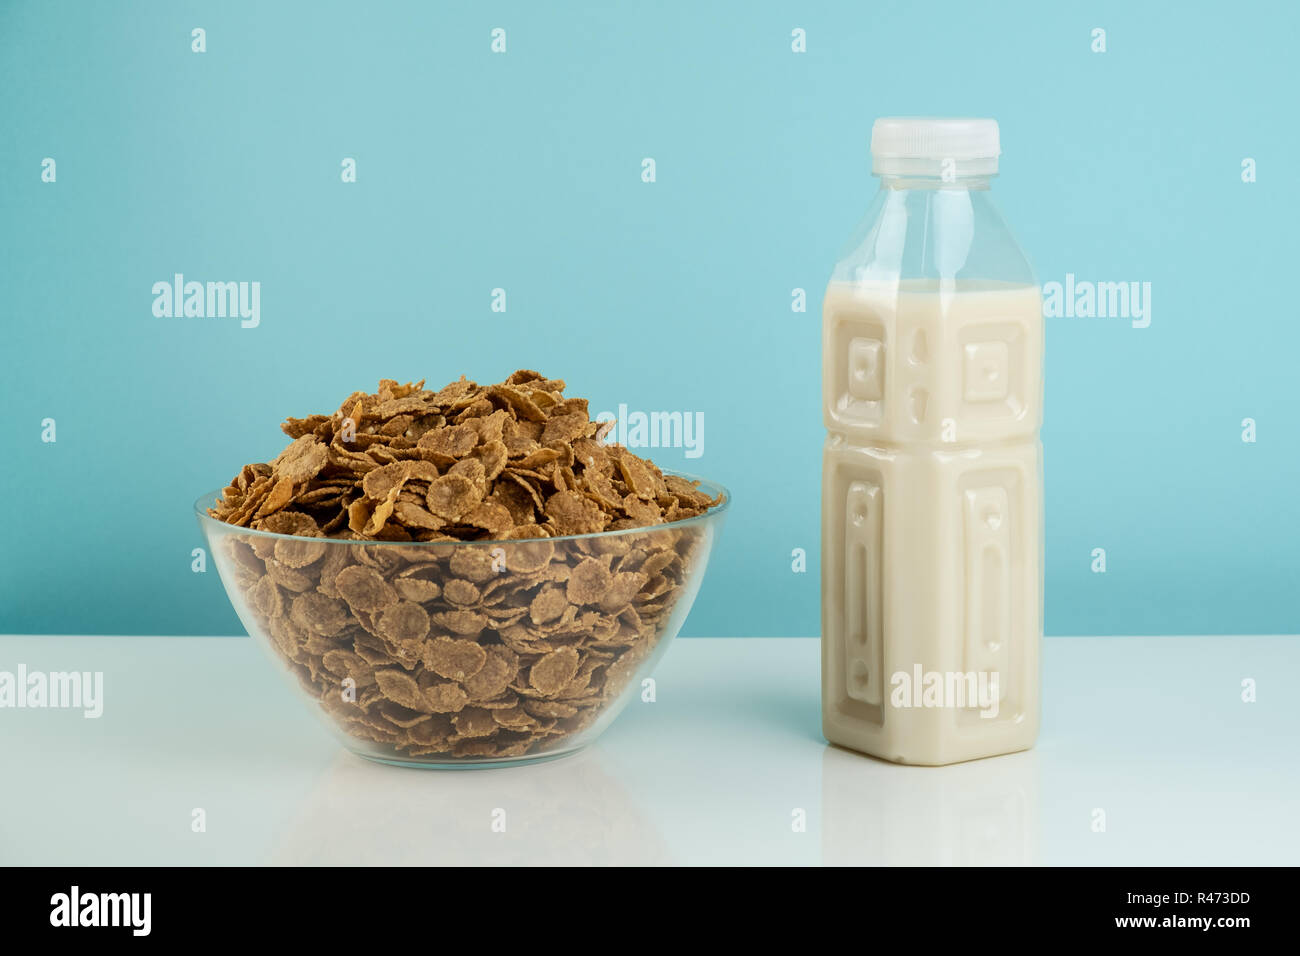 Helathy vegetarian breakfast concept. Bowl full of cereals and bottle of milk on white table and blue background Stock Photo